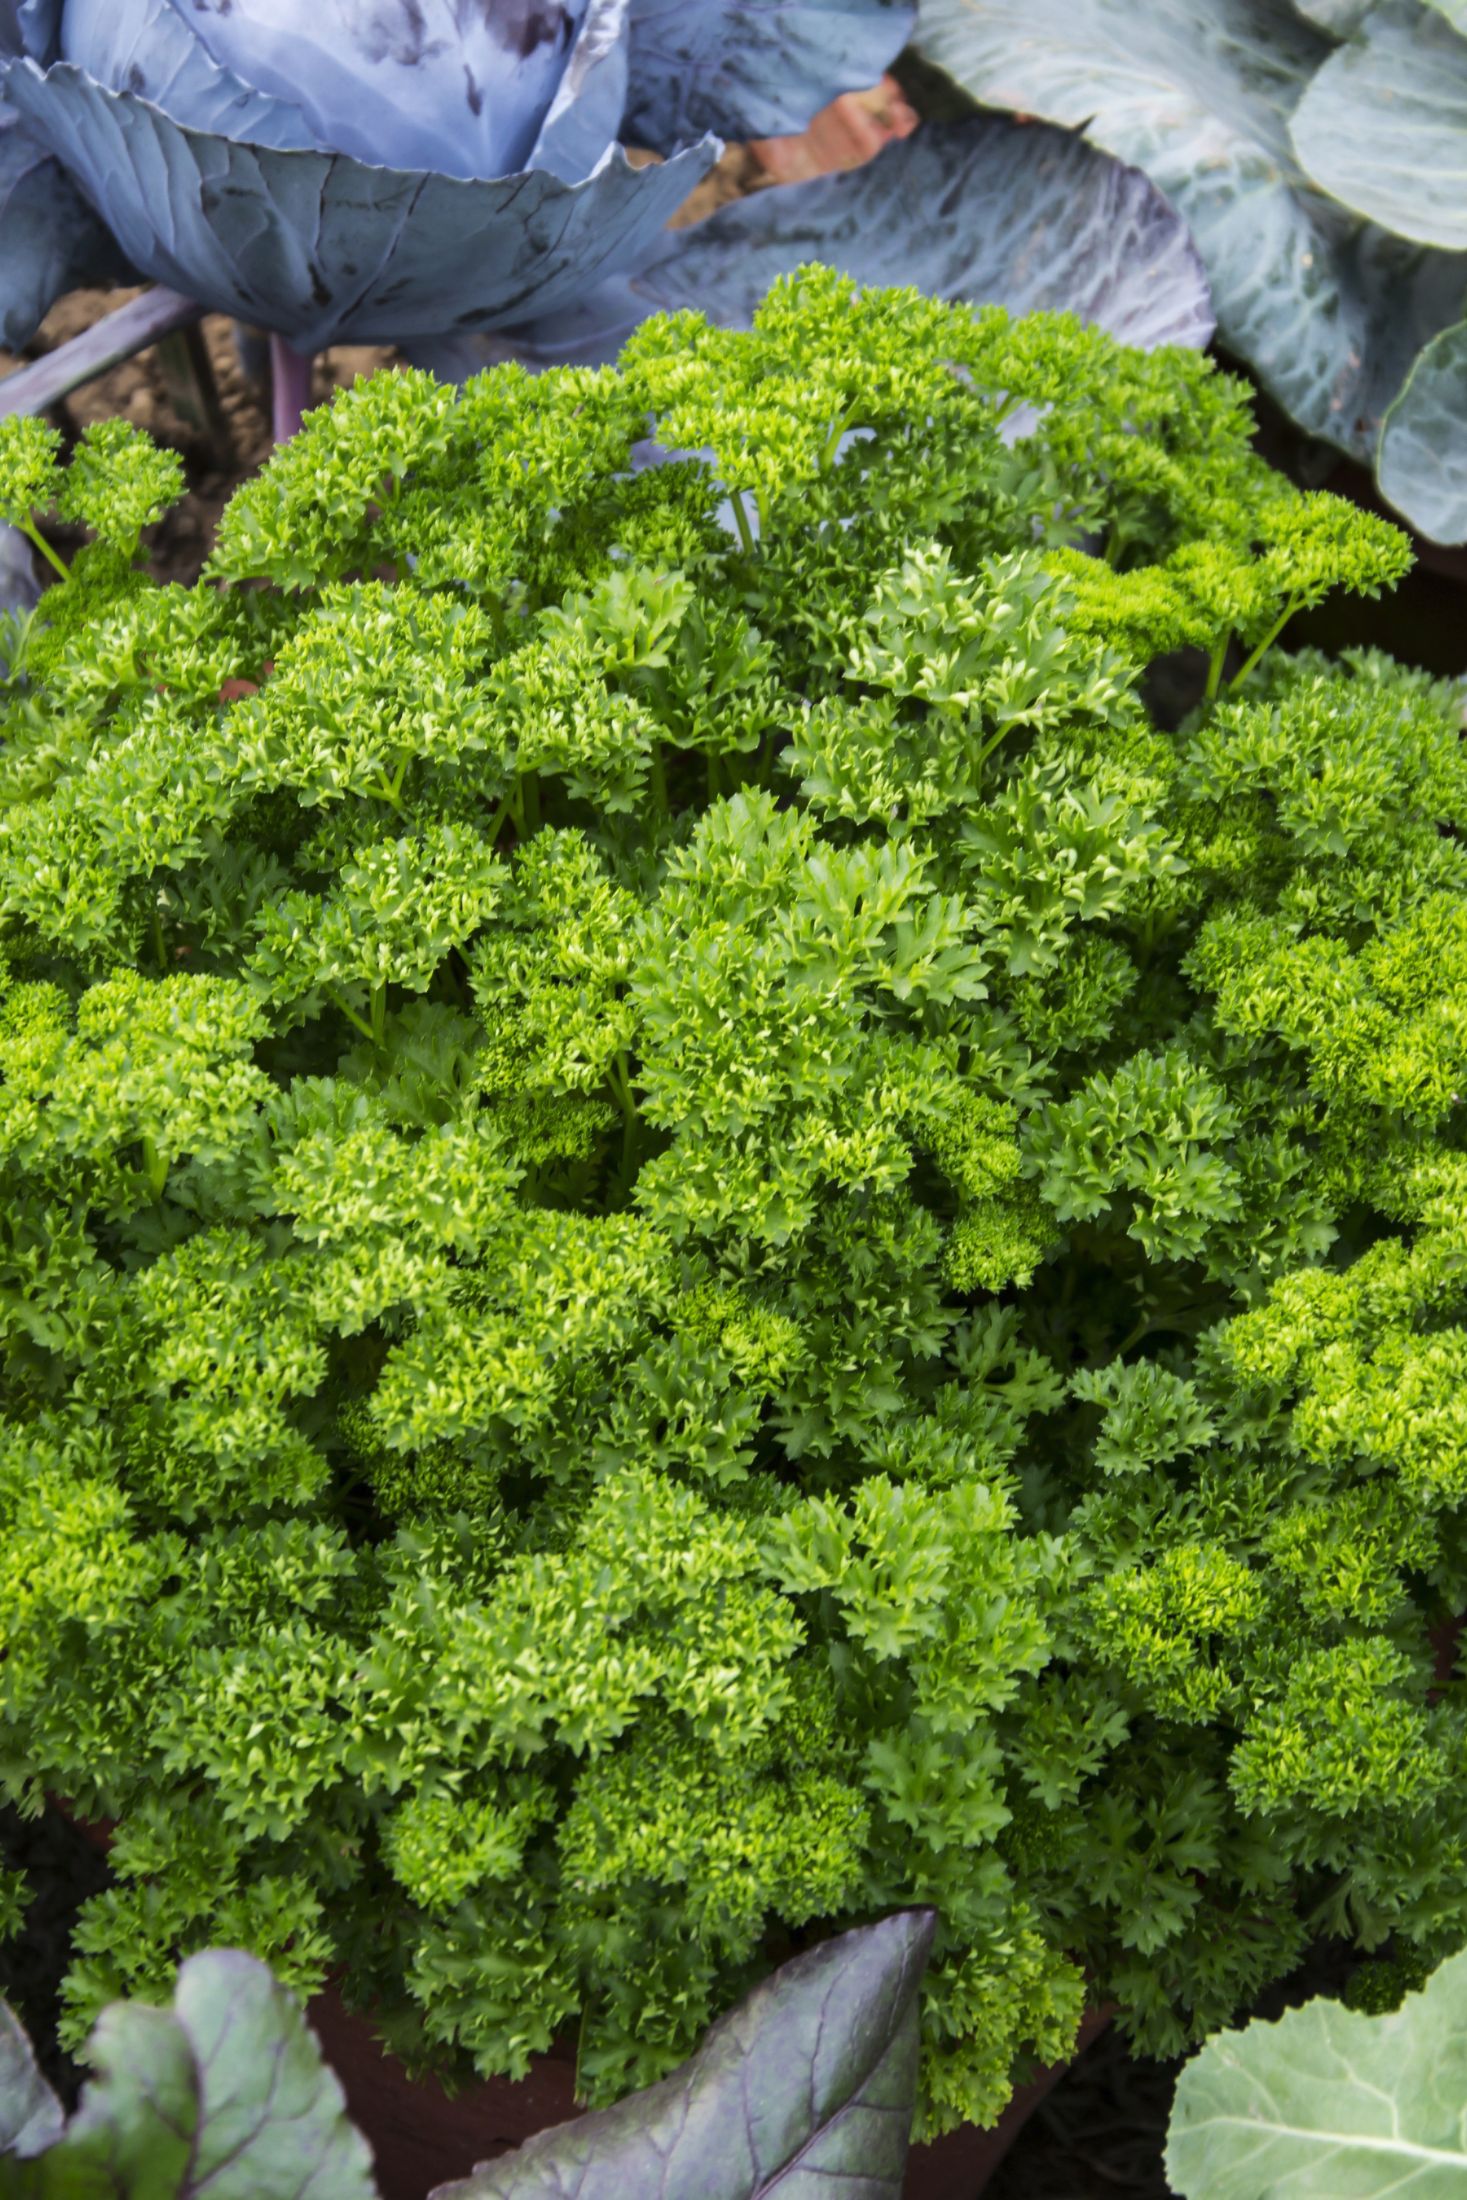 Curly parsley plant.
